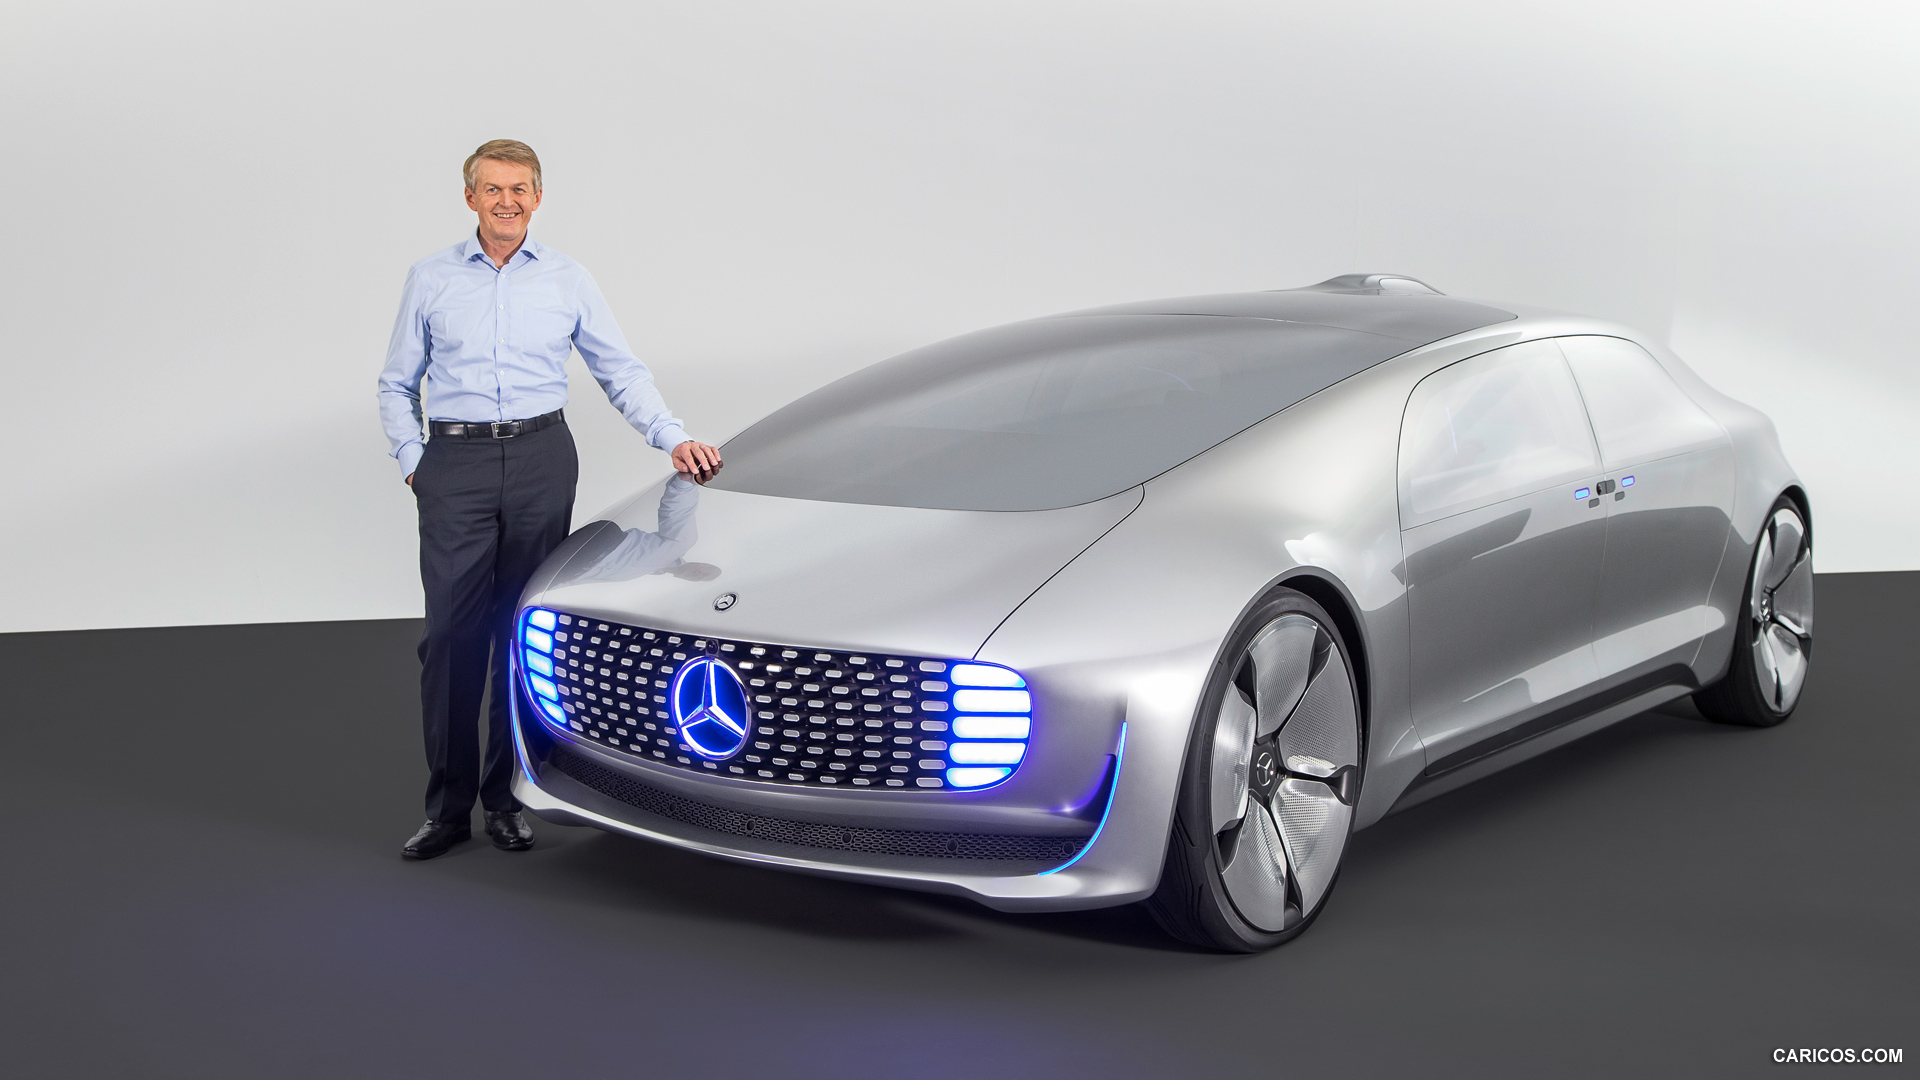 2015 Mercedes-Benz F 015 Luxury in Motion Concept  - Front, #69 of 92